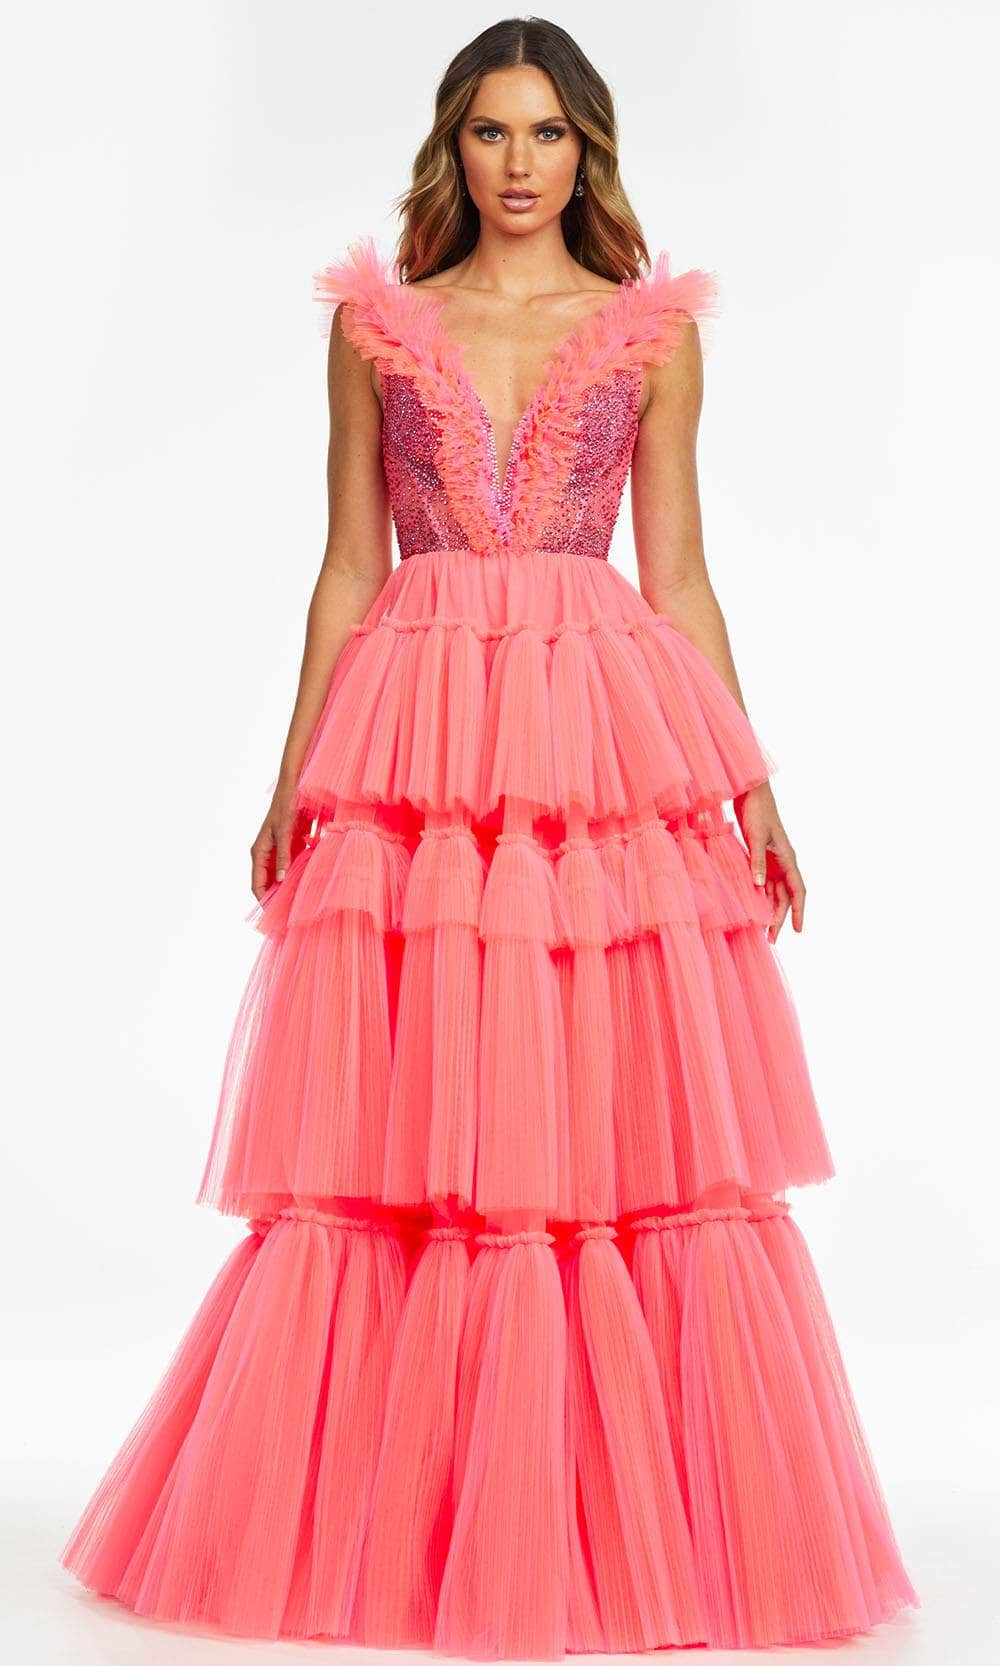 Ashley Lauren 11140 - Tiered Tulle A-Line